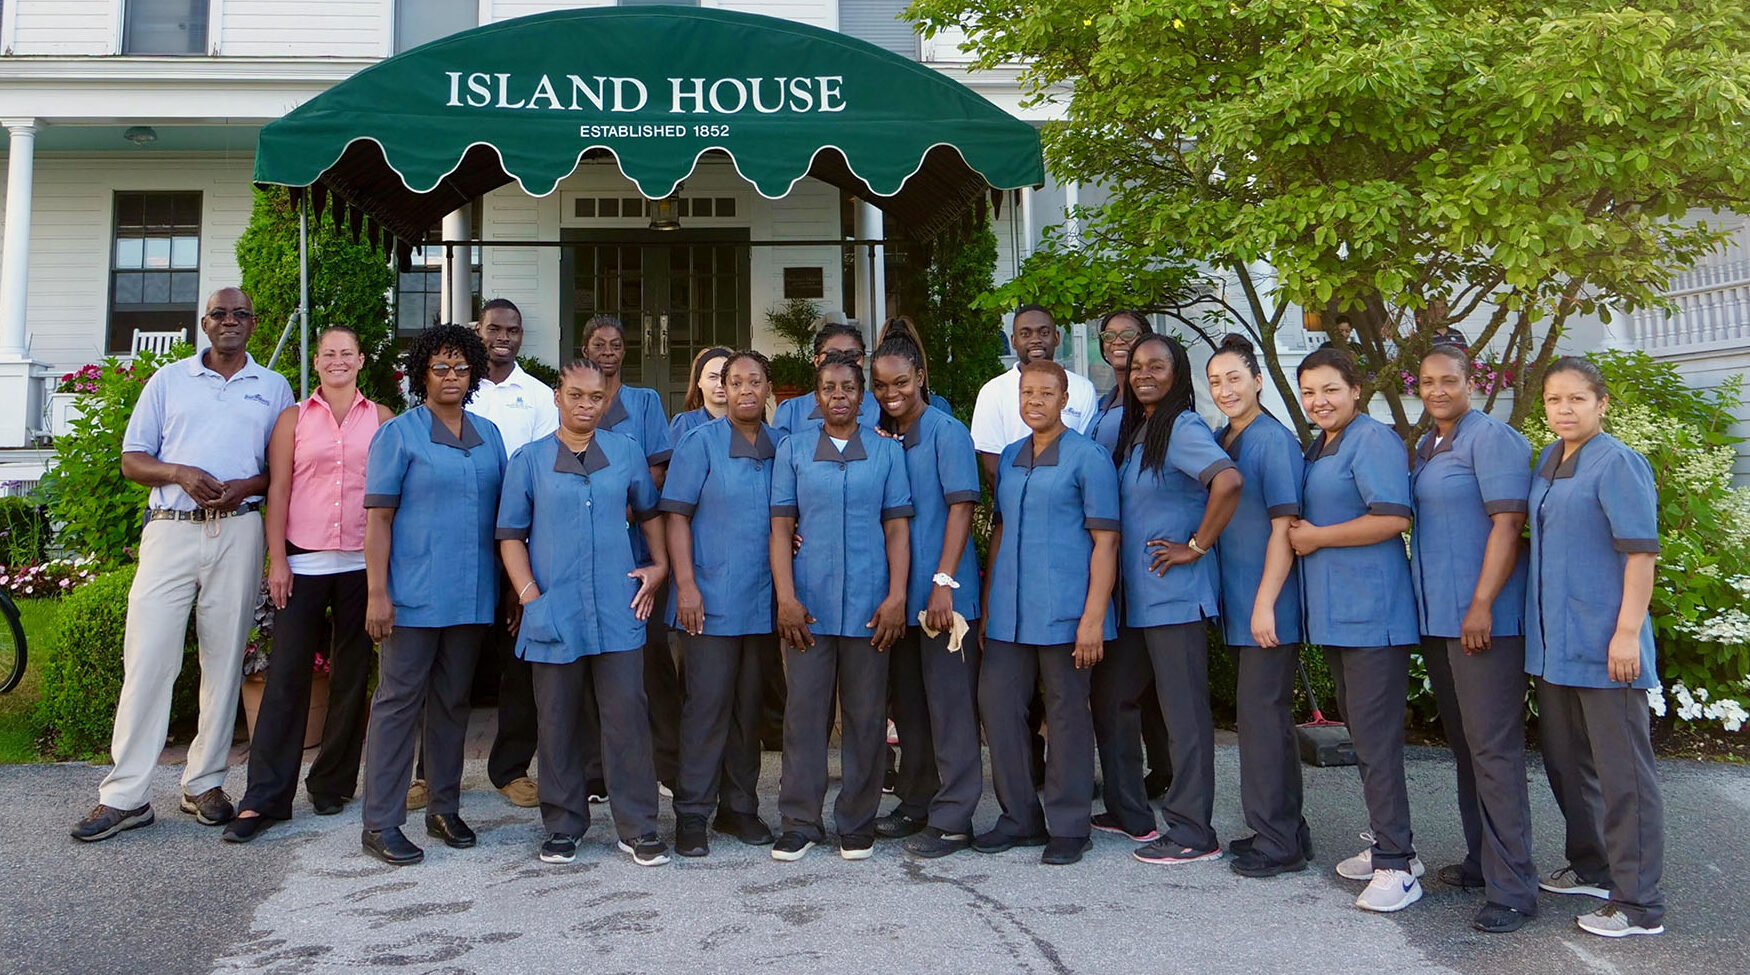 Hospitality Workers at the Island House Hotel